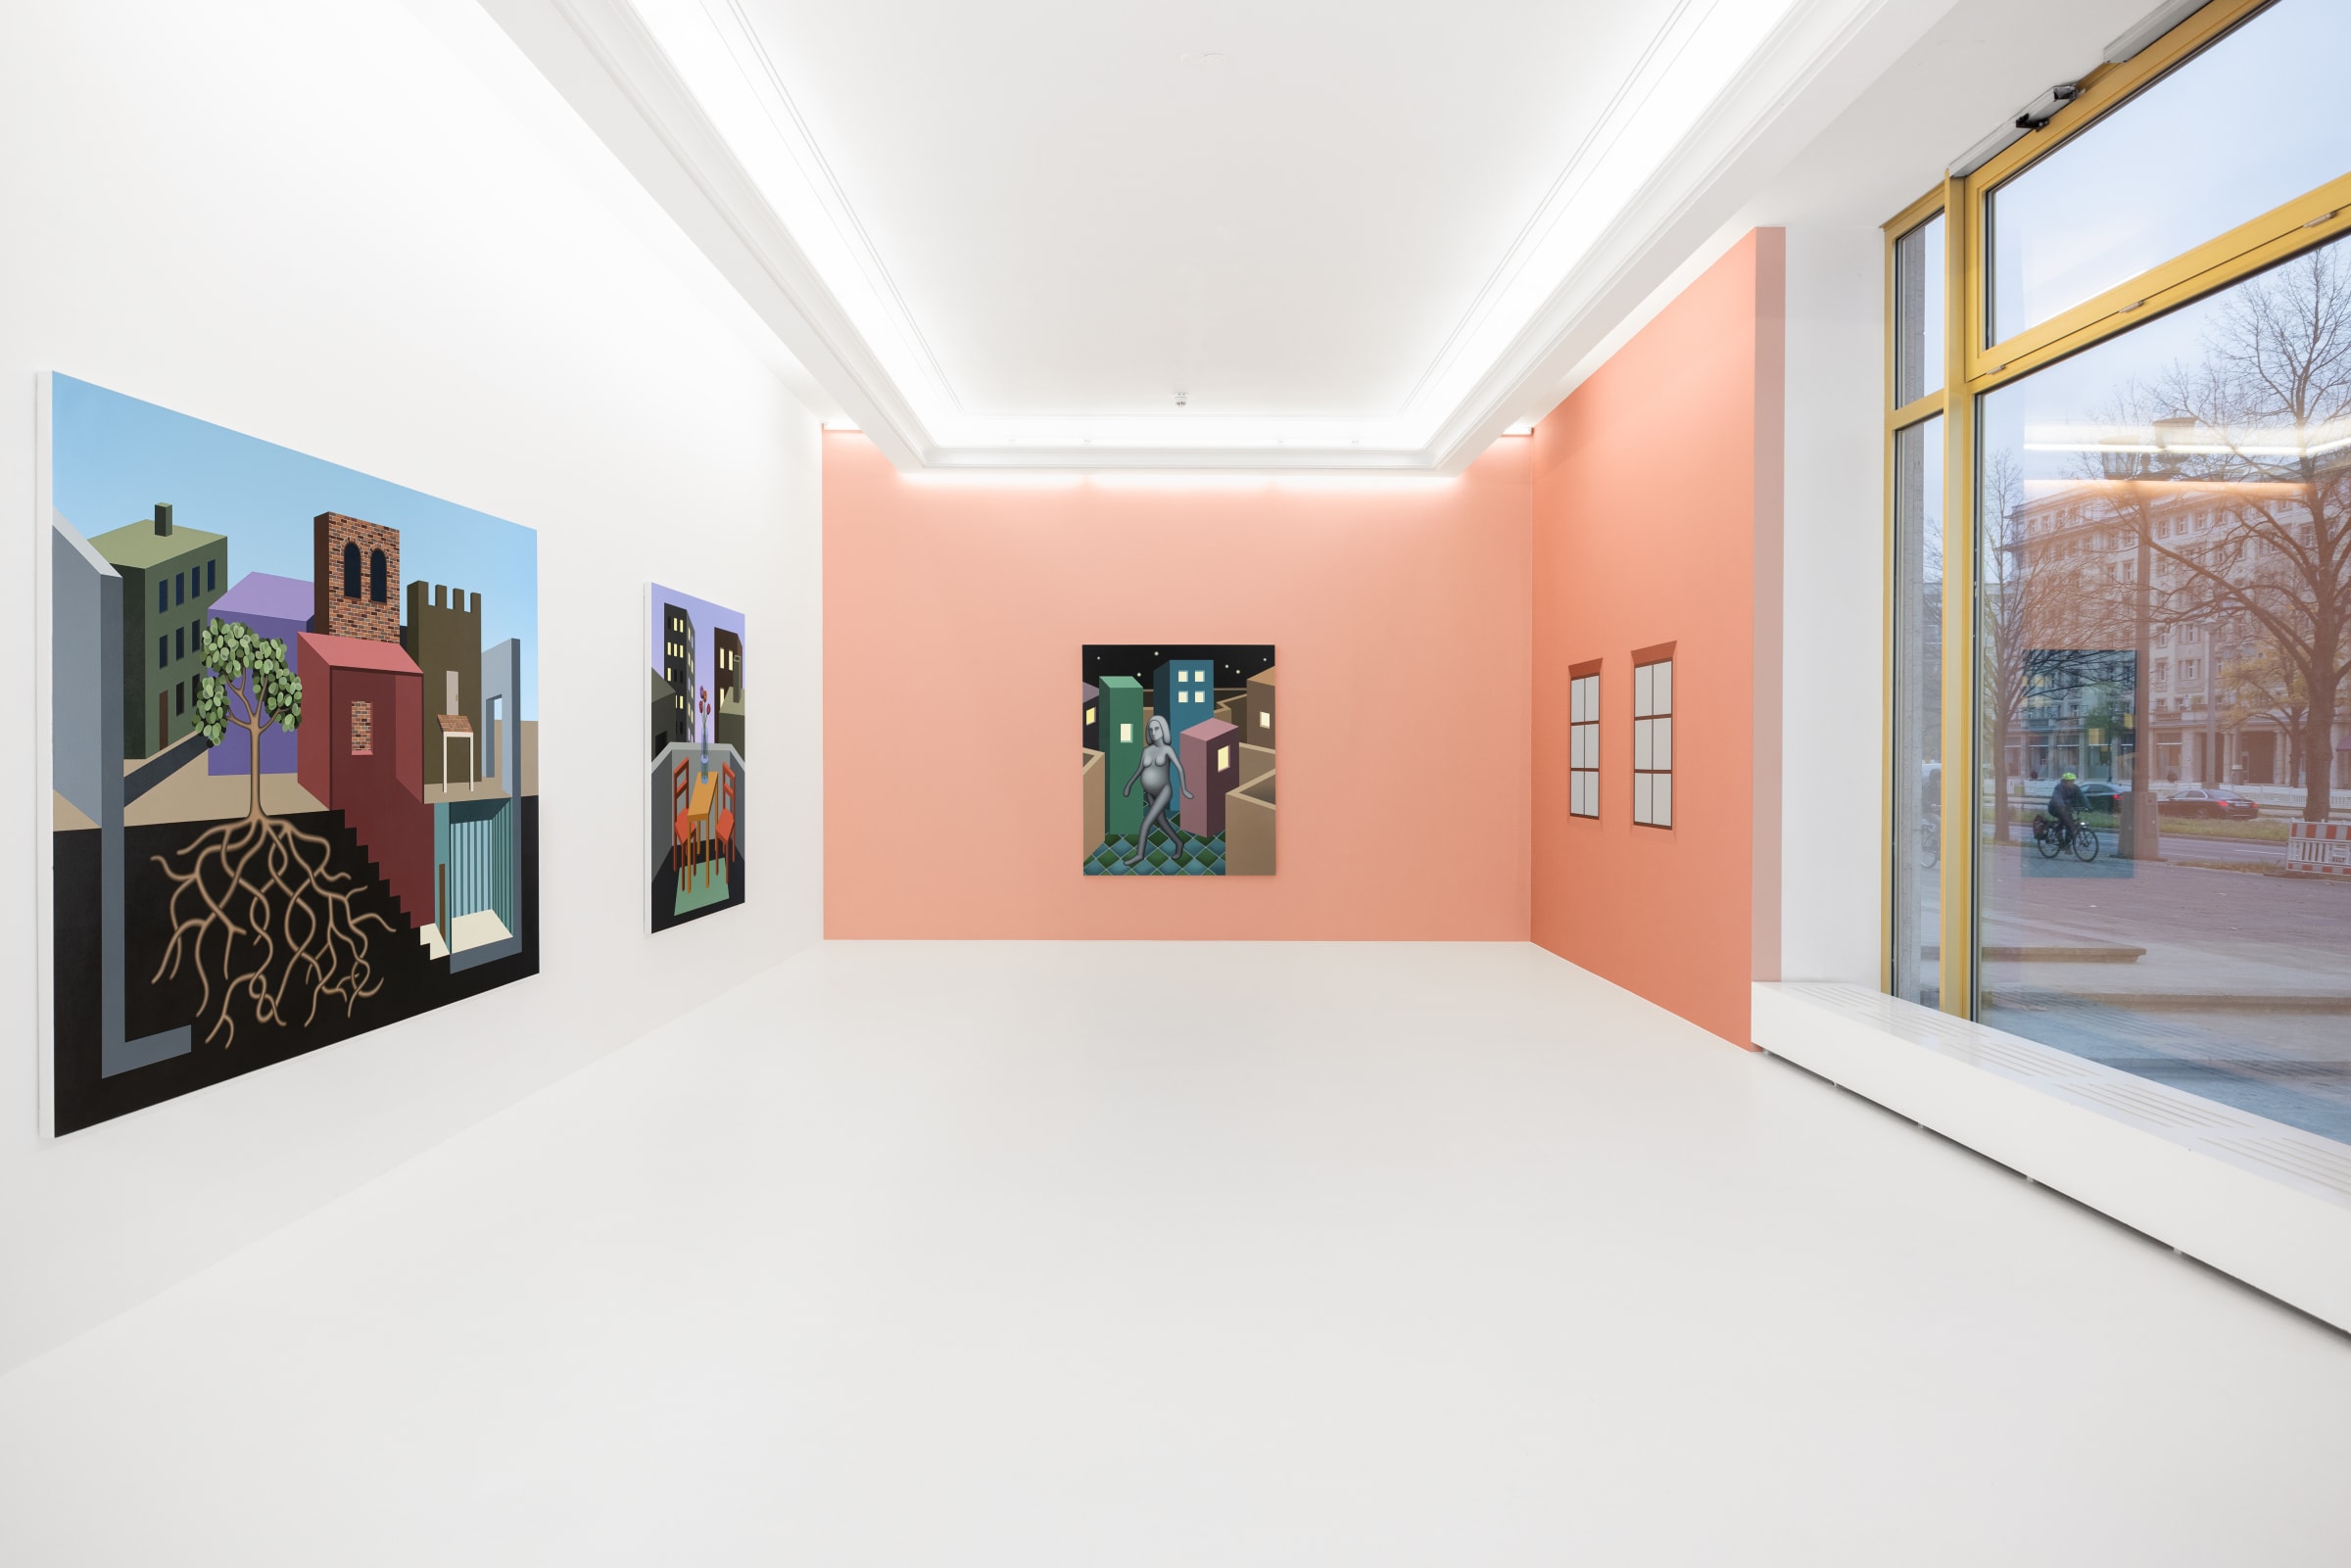 Emily Ludwig Shaffer In Stead of Me Installation View November 18, 2022 – January 6, 2023 Peres Projects, Berlin